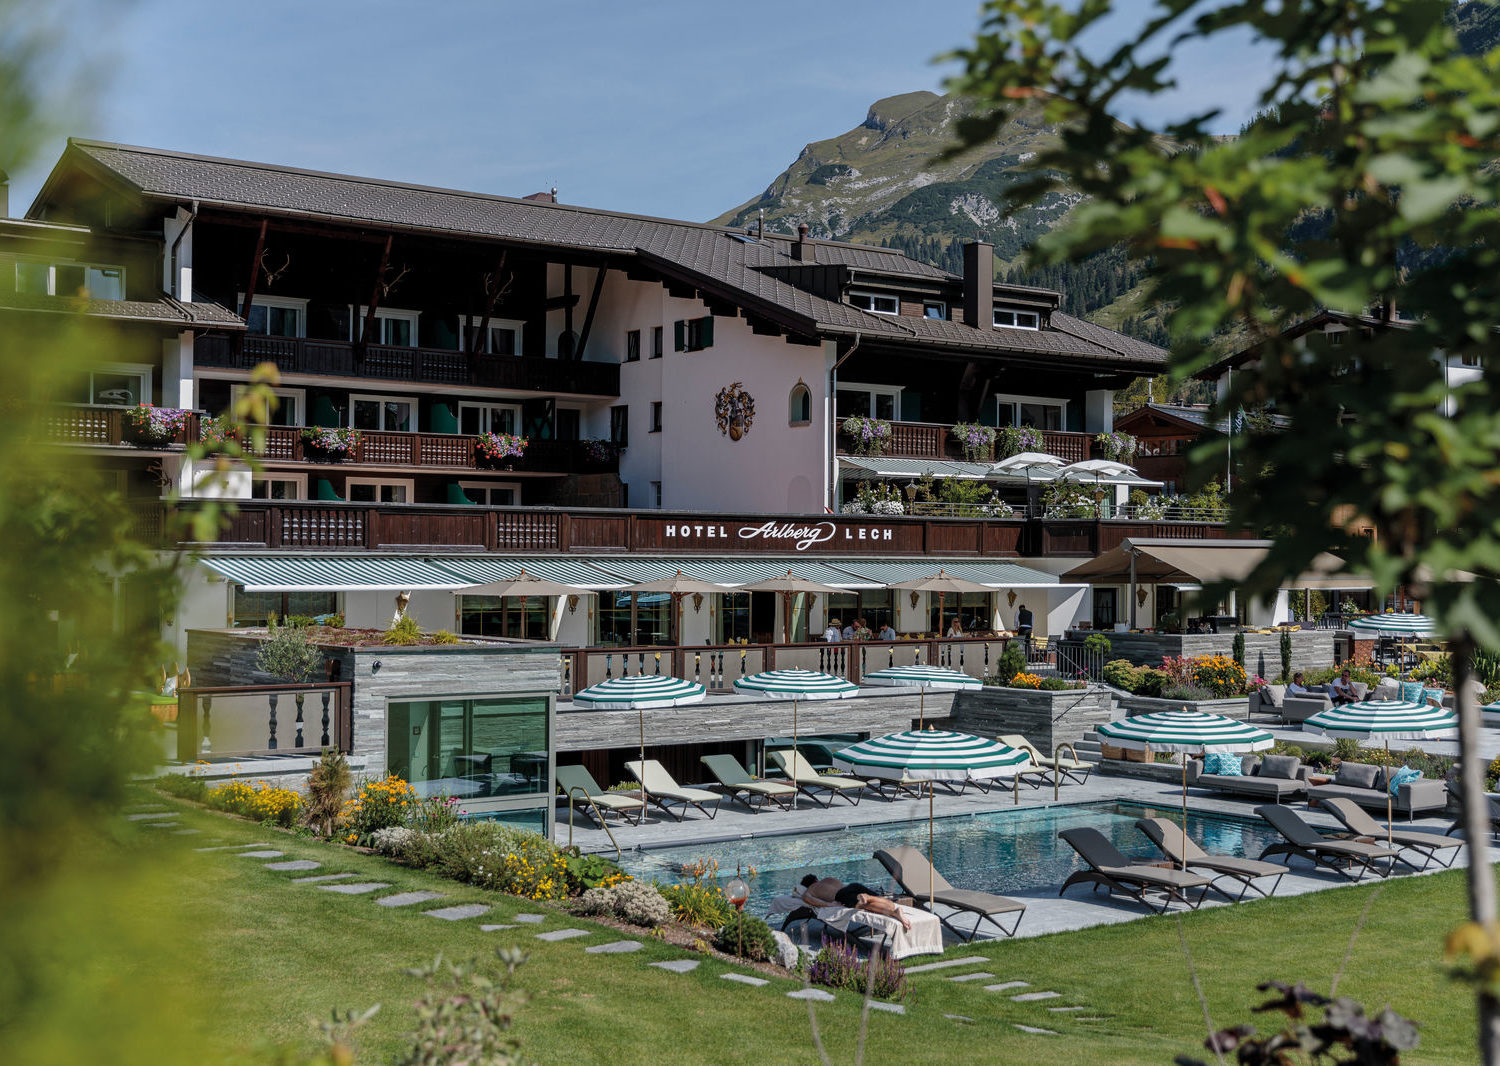 Hotel Arlberg We loved visiting in summer but can only imagine how great this steamy pool might be when the snow takes the landscape over